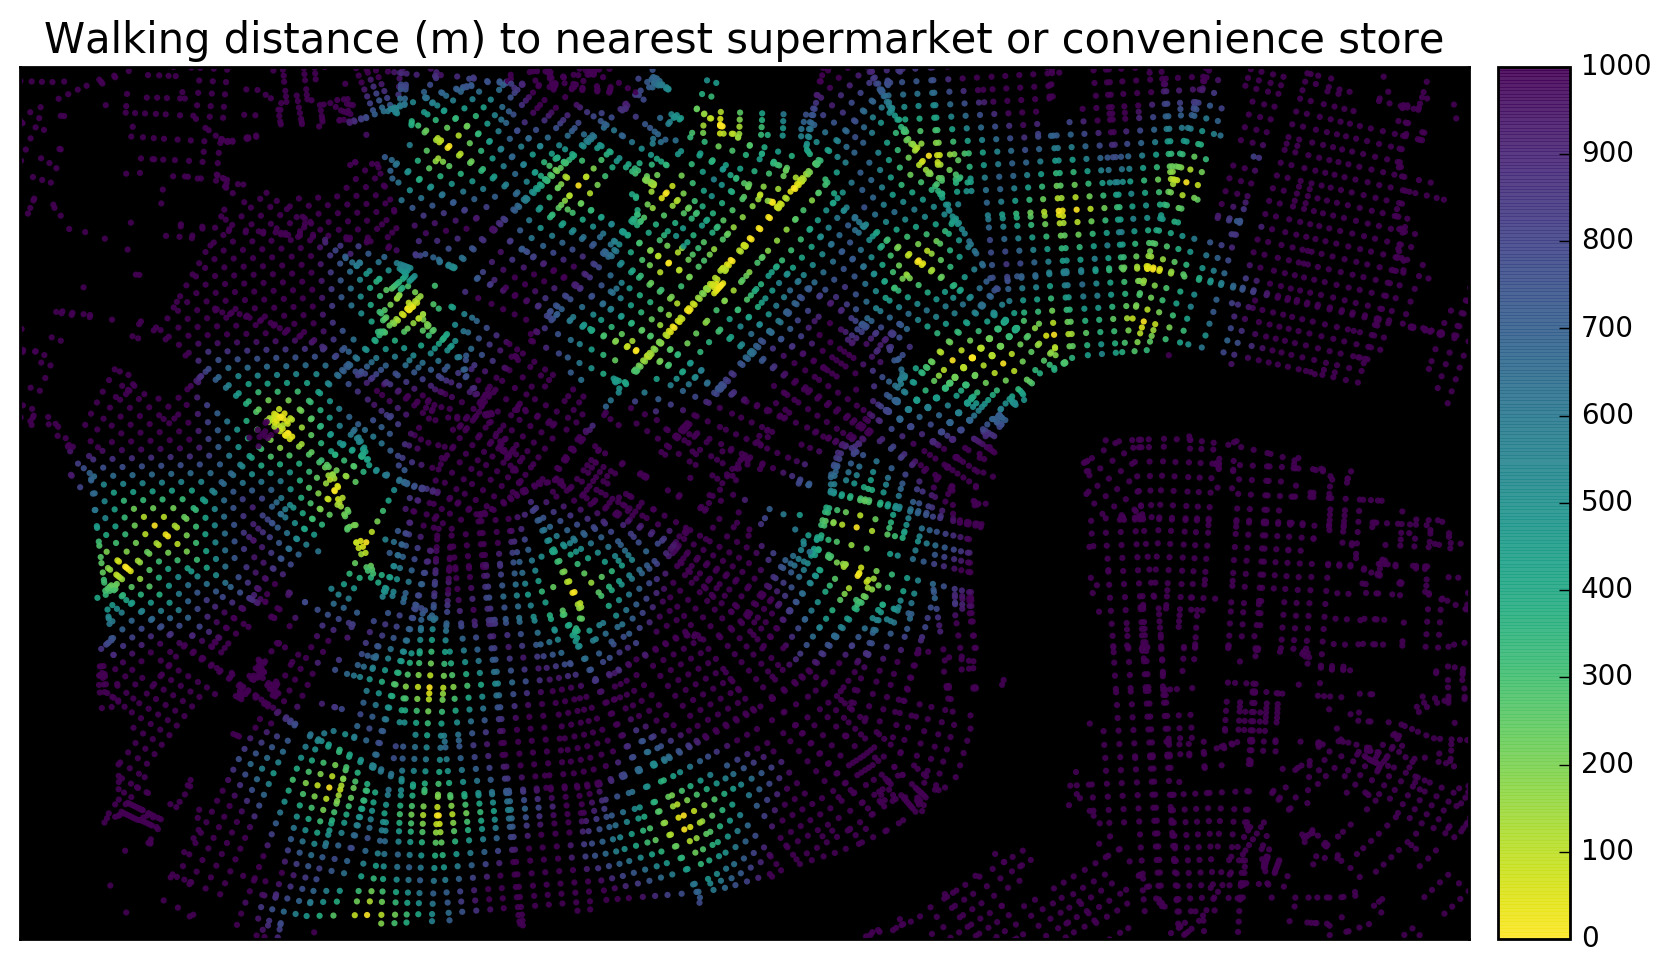 Walkability to nearest supermarket or convenience store